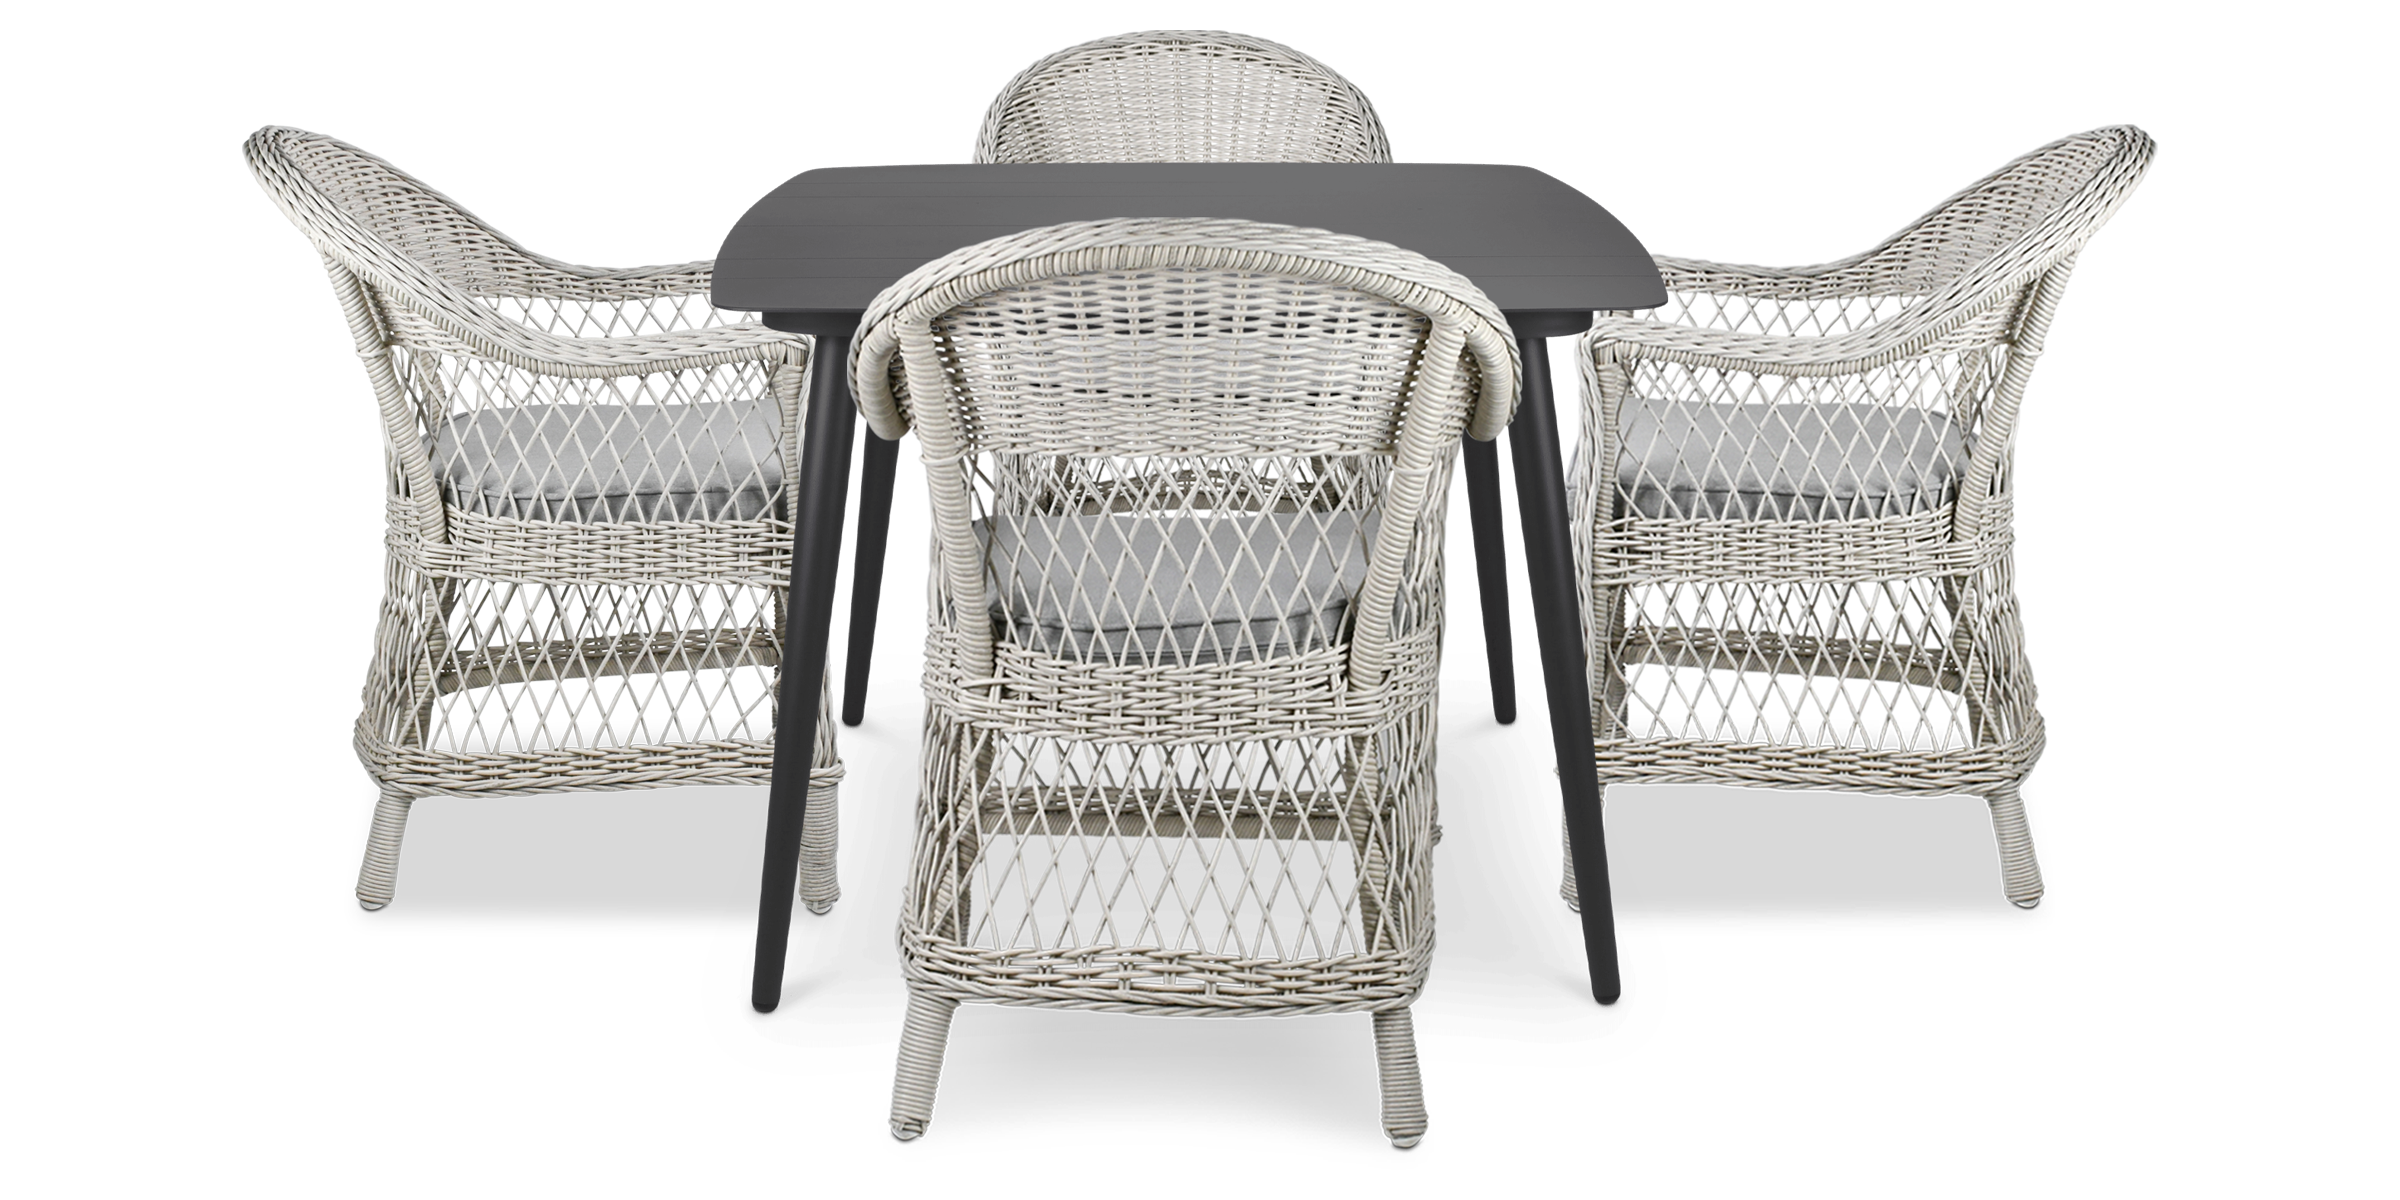 Amalfi Square 5 Piece Outdoor Setting in Gunmetal with Wicker Chairs